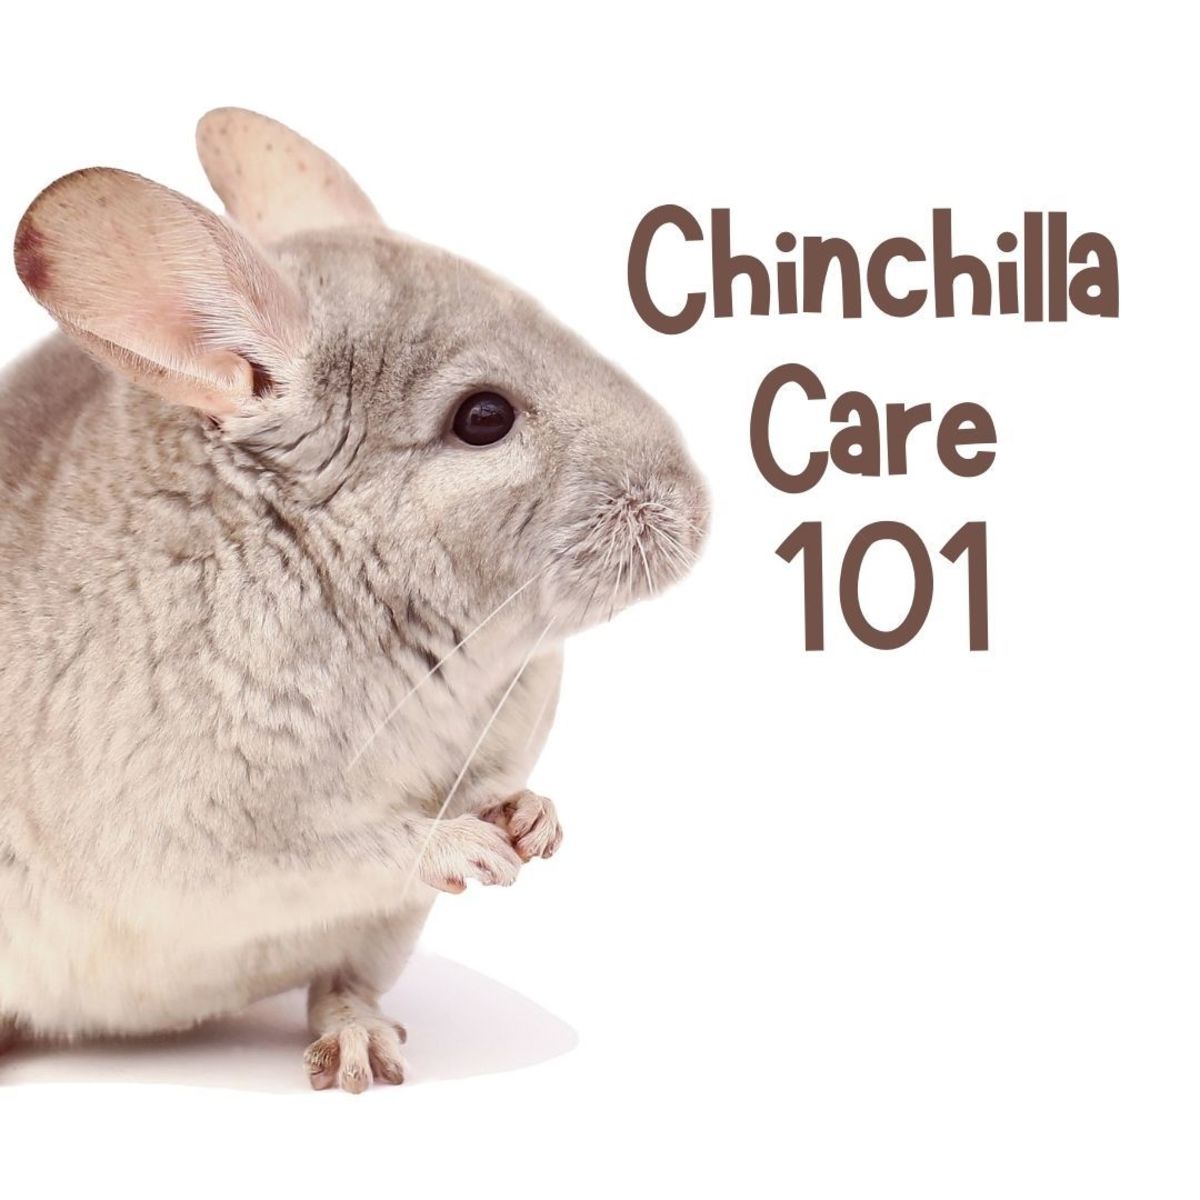 The basics of caring for a chinchilla